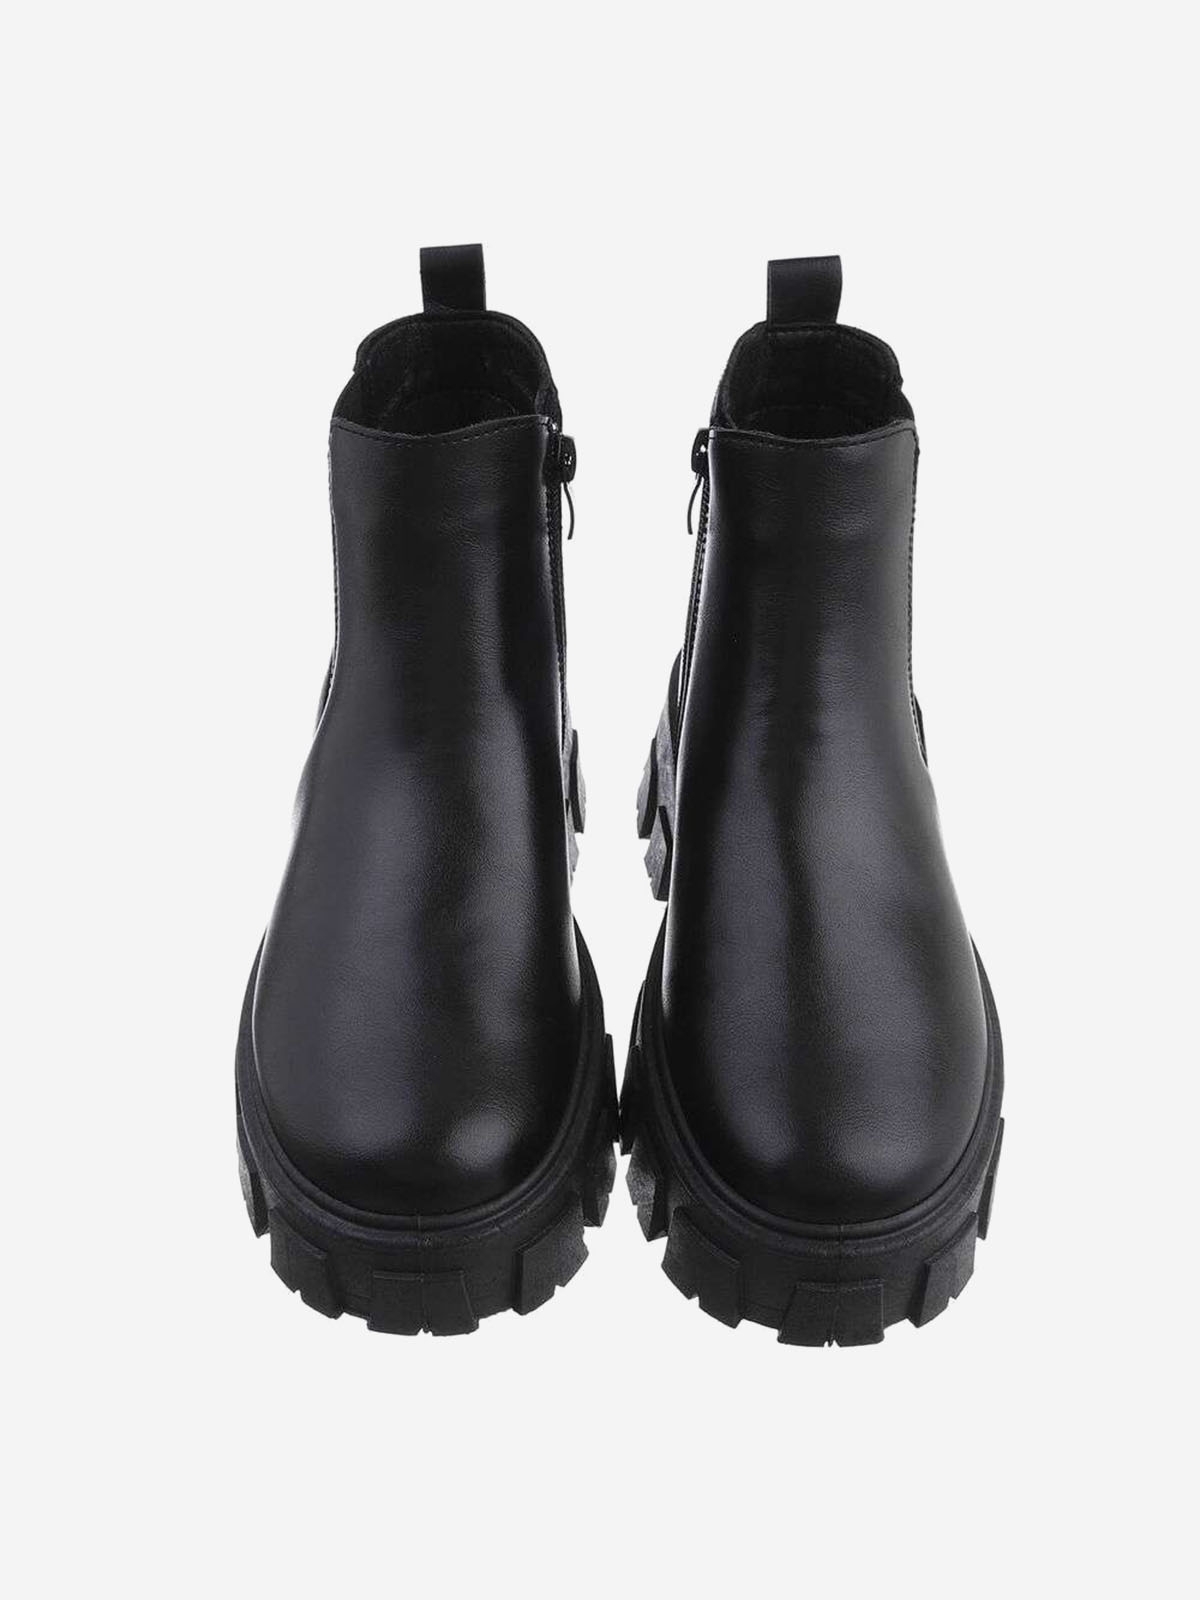 Women's ankle boots with platform in black